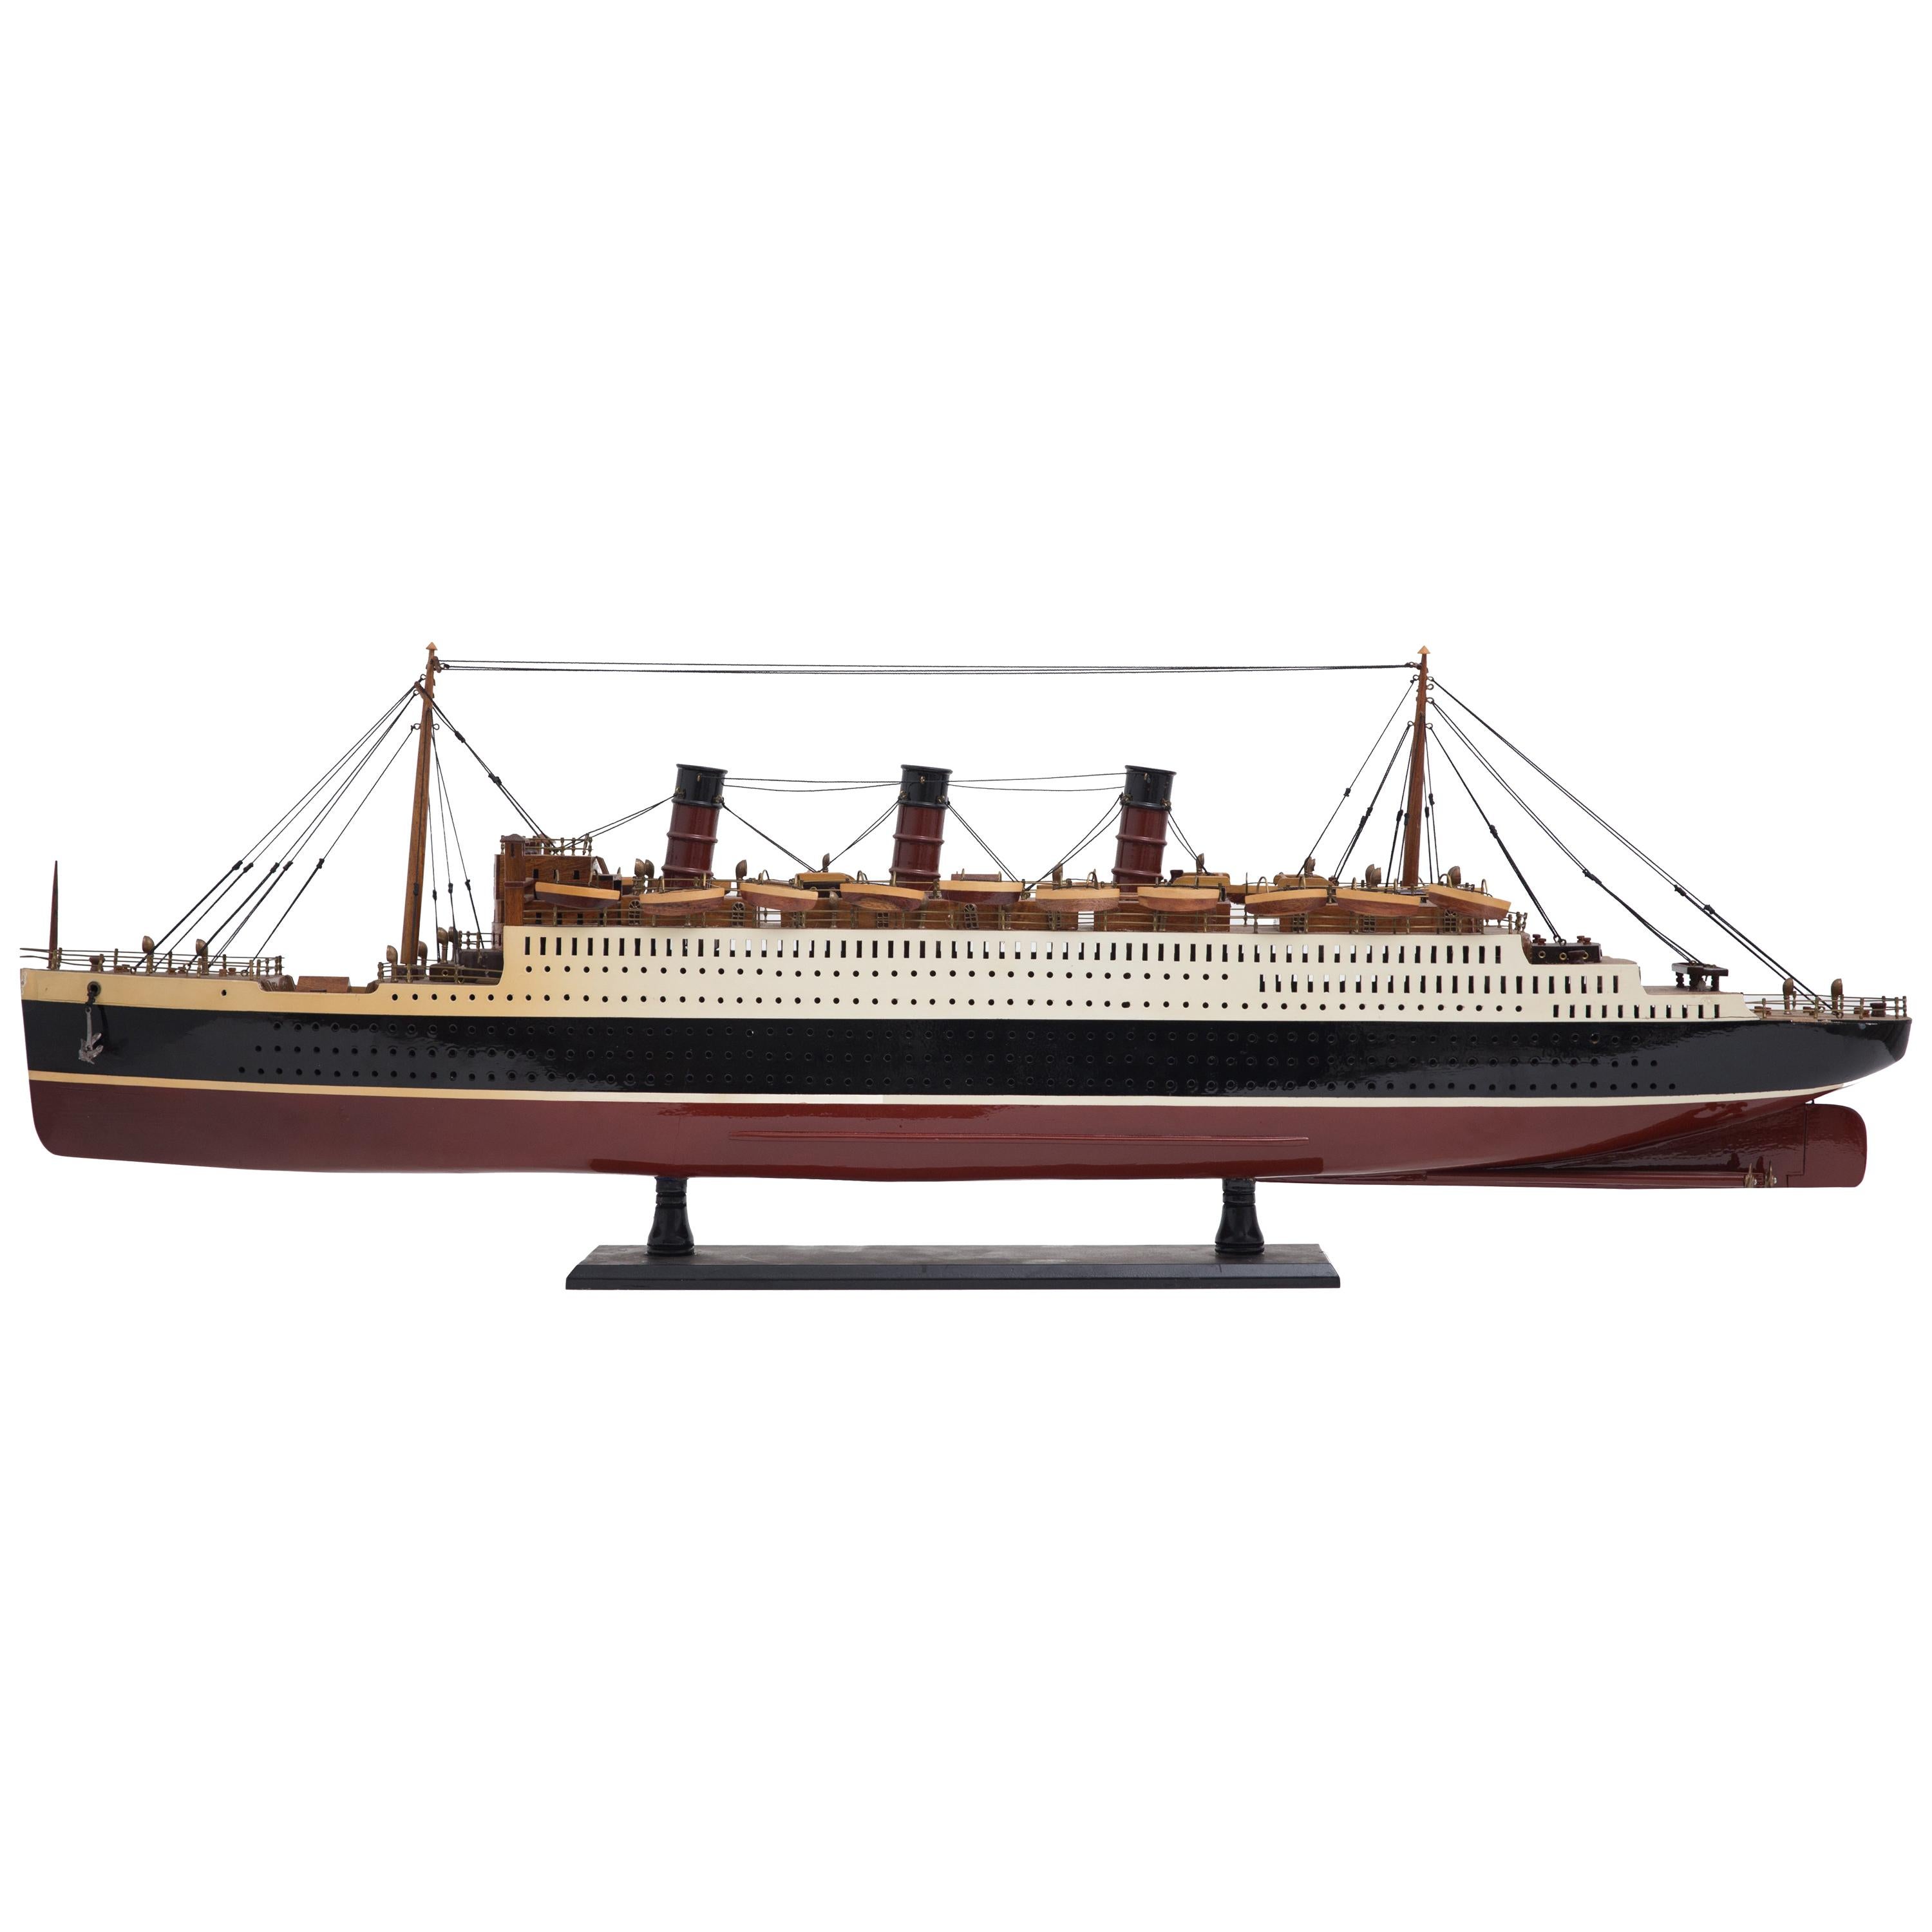 Model of the Cunard luxury Liner, Queen Mary